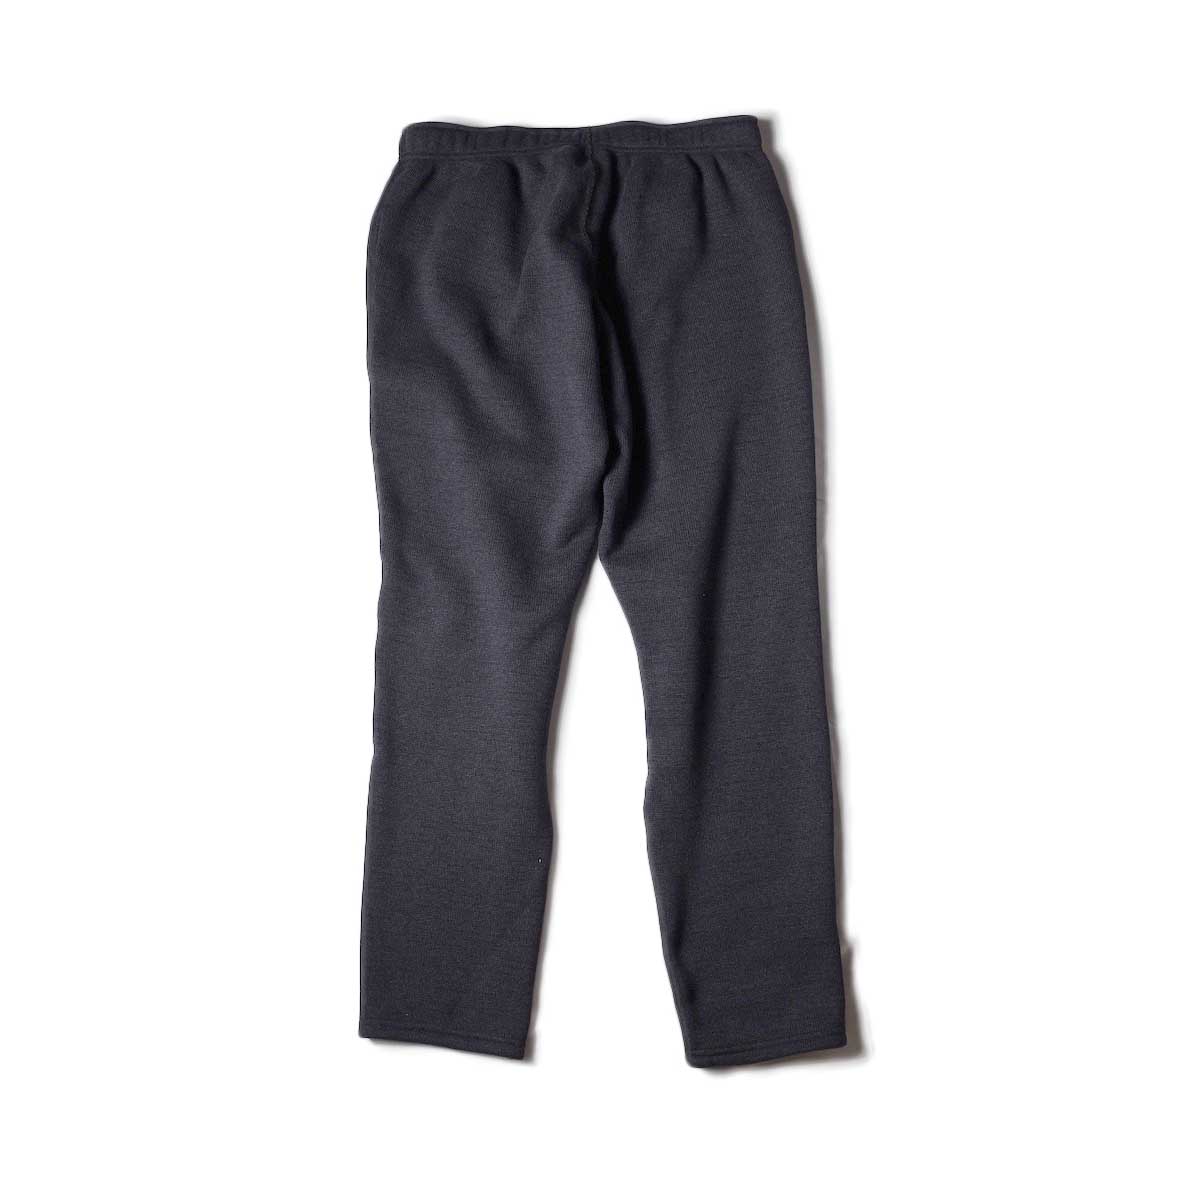 South2 West8 / 2P Cycle Pant - POLARTEC Fleece Lined Jersey (Black)背面